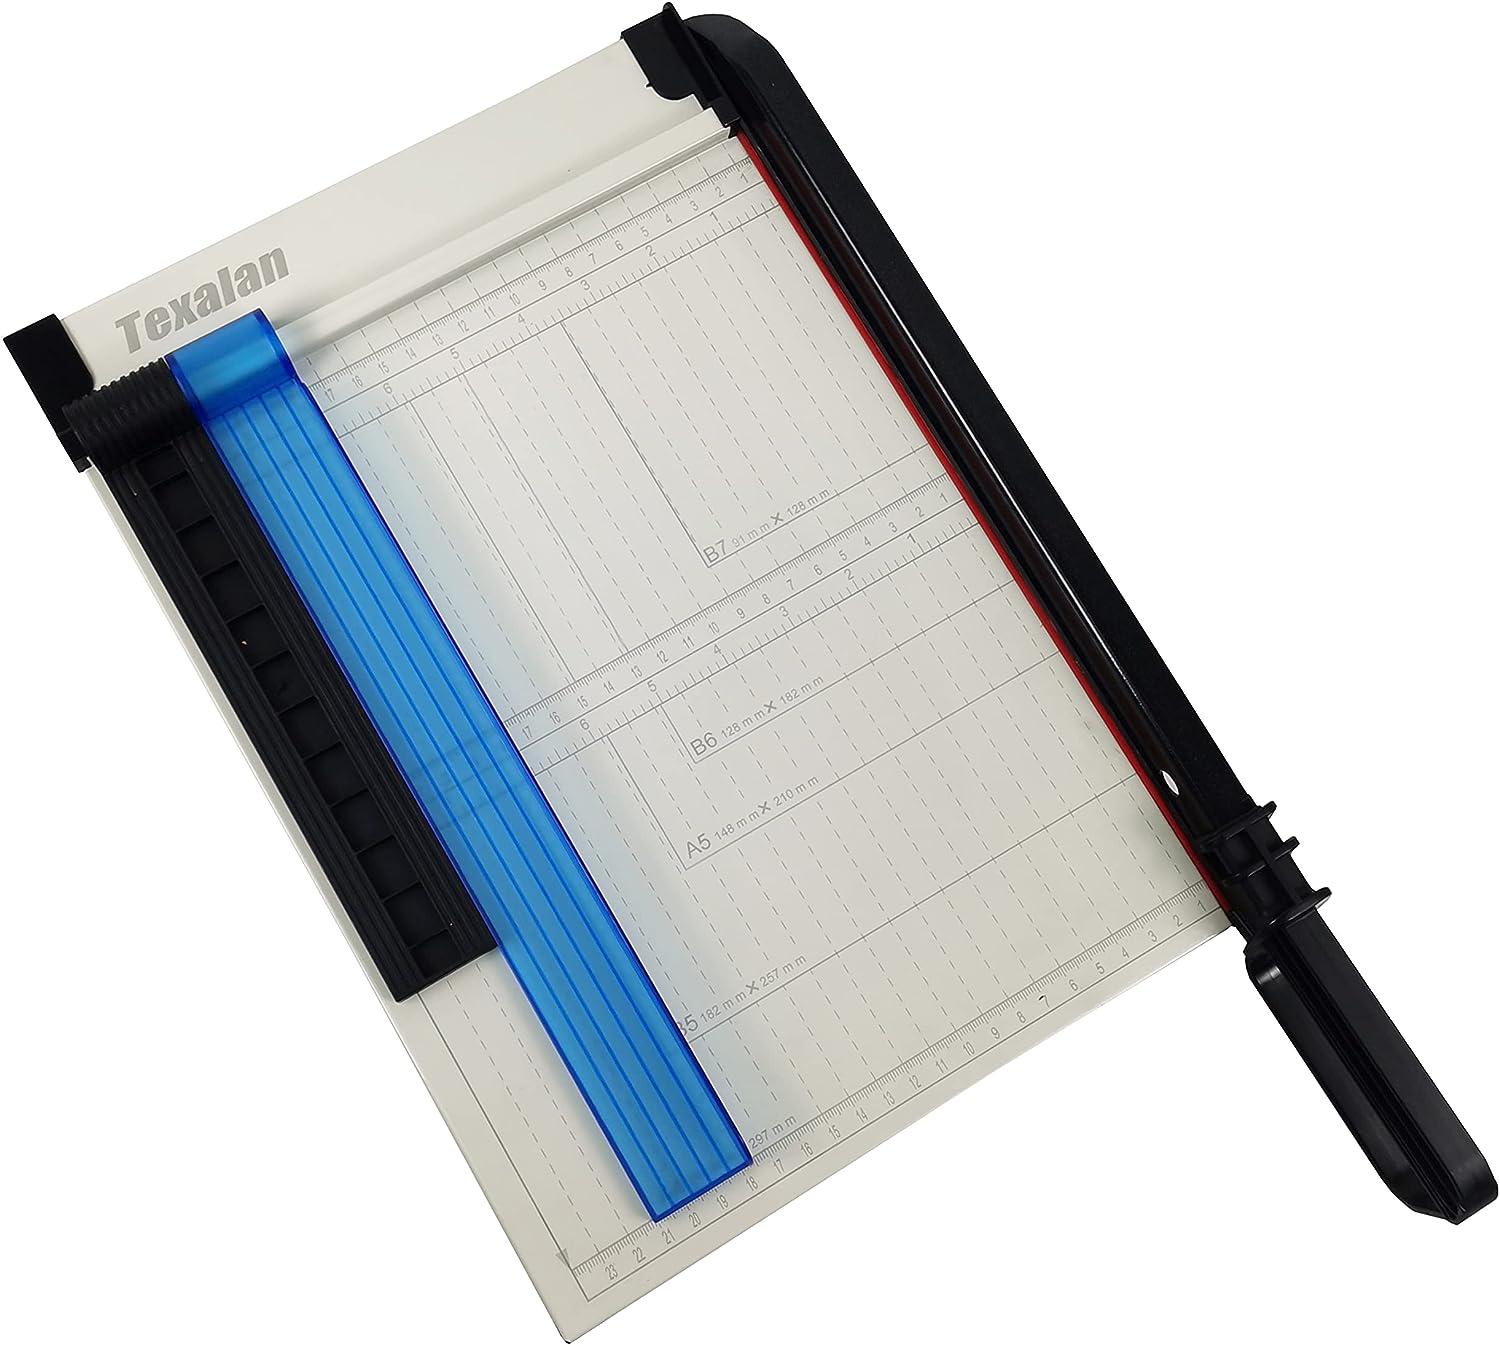 Trimmer or Guillotine Paper Cutter: Which Do You Need?